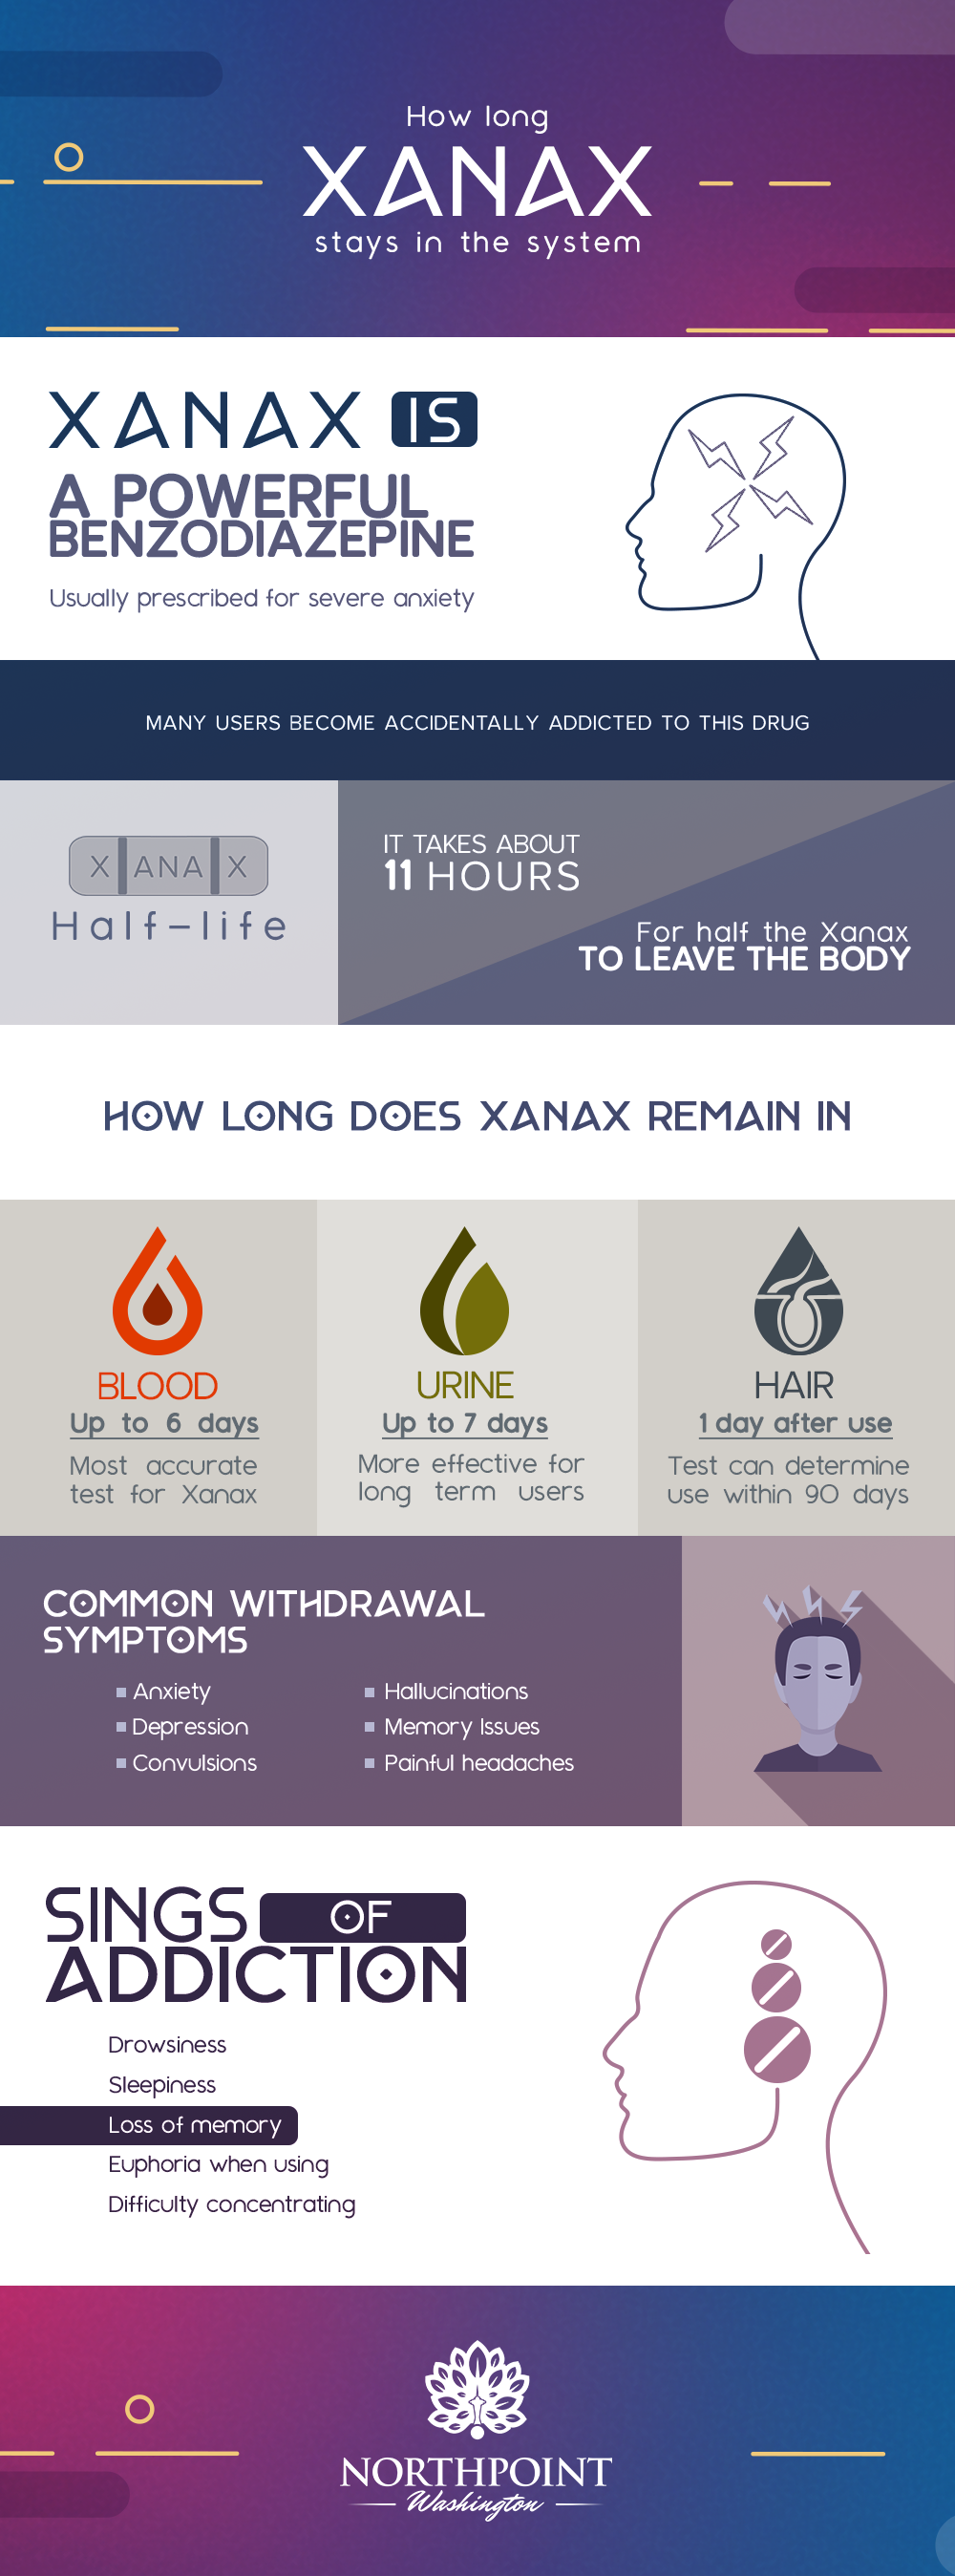 How Long Does Xanax Stay in Your System Infographic